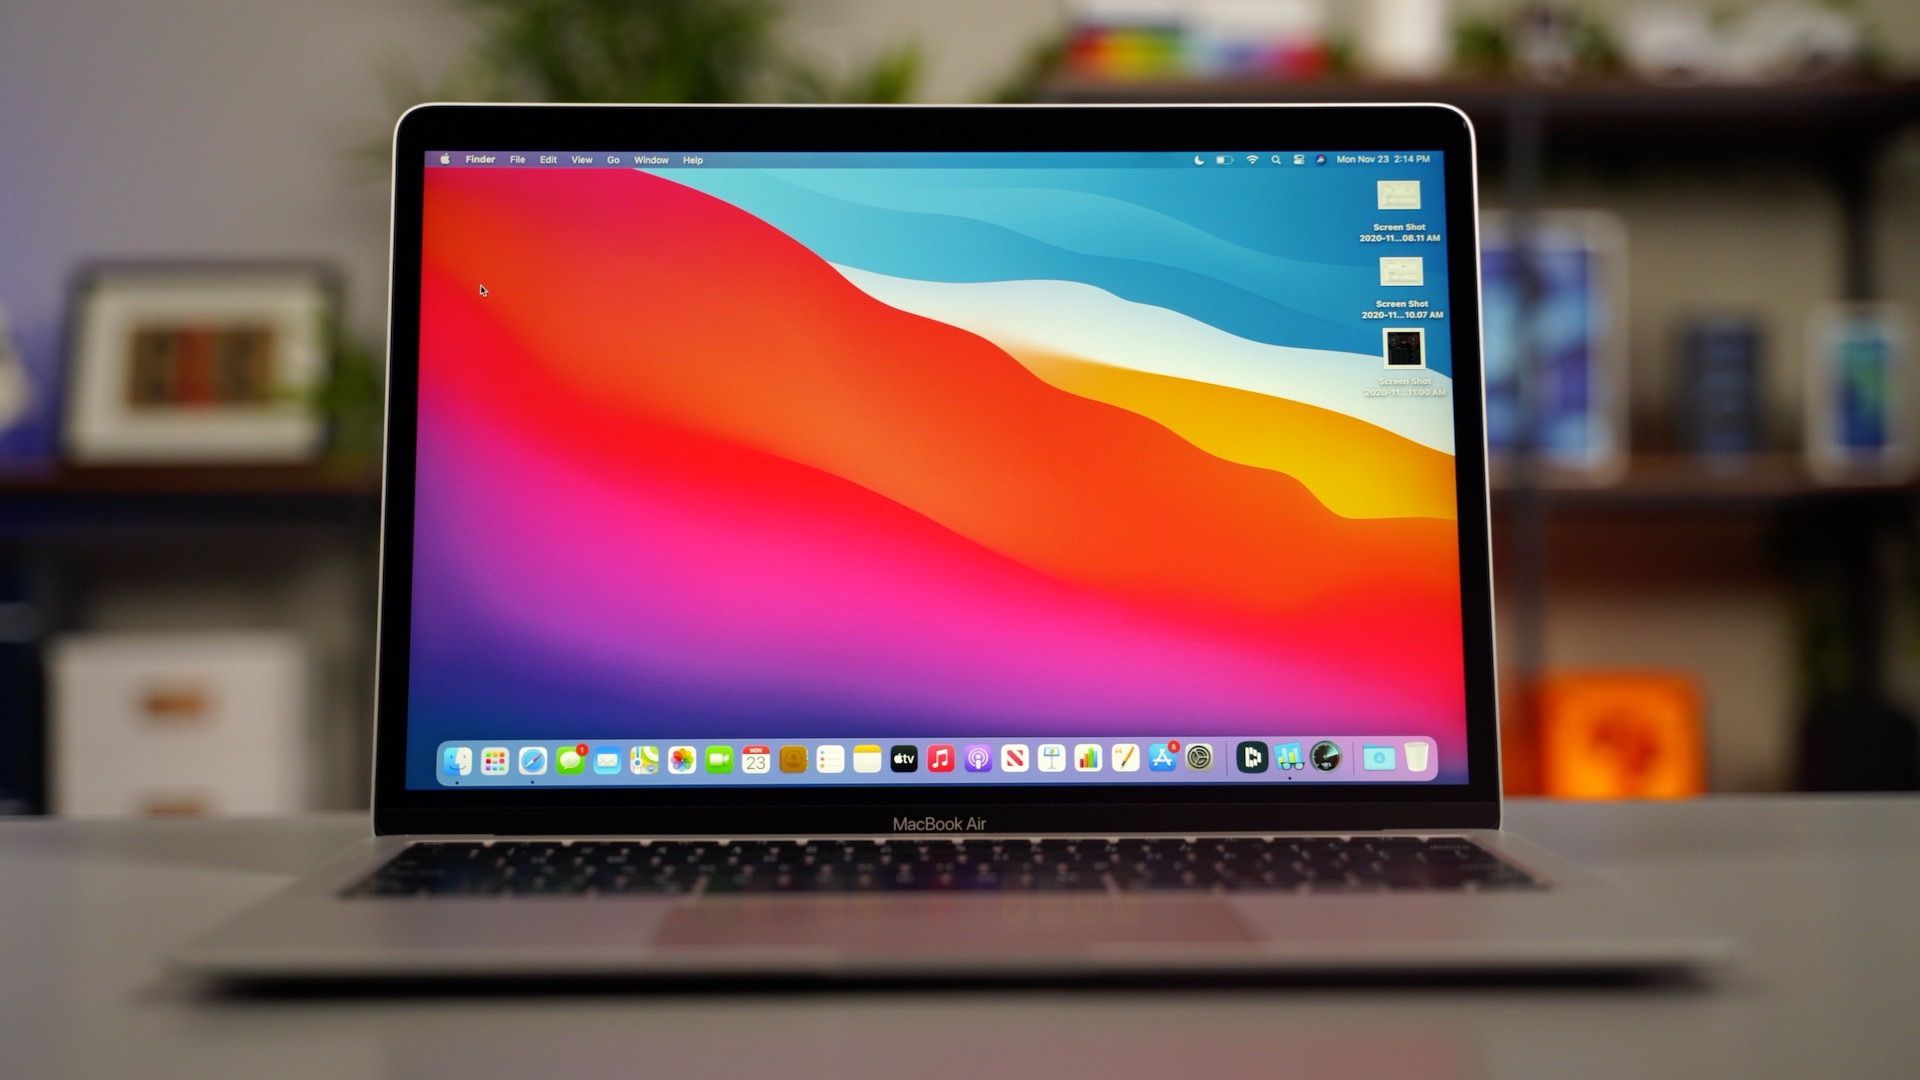 Apple is expected to release a new MacBook Pro in October